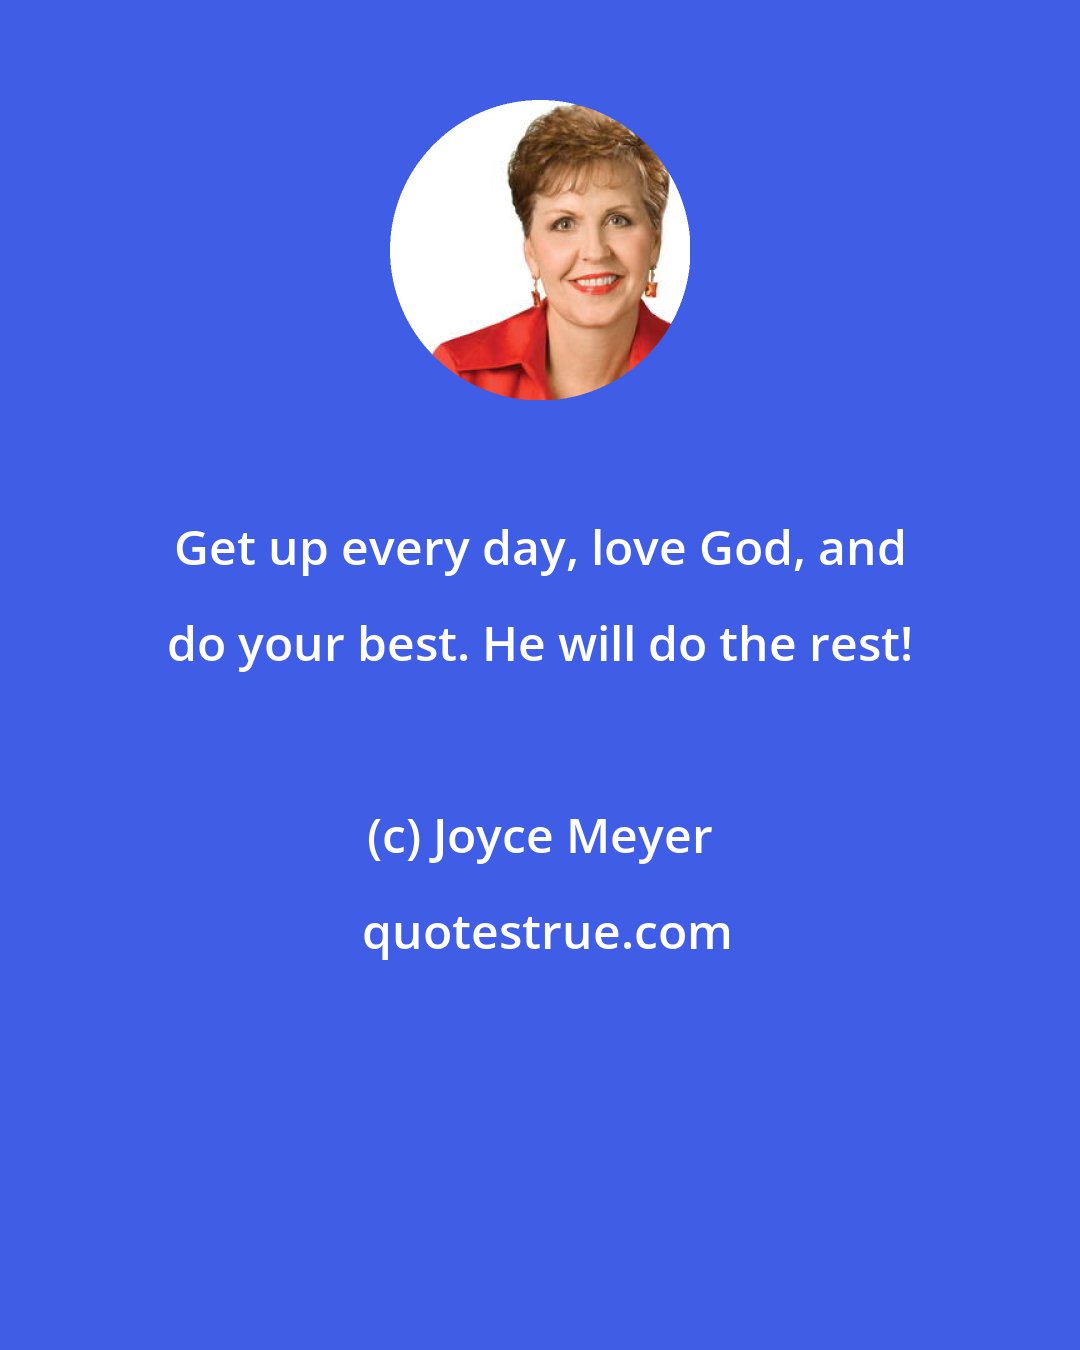 Joyce Meyer: Get up every day, love God, and do your best. He will do the rest!